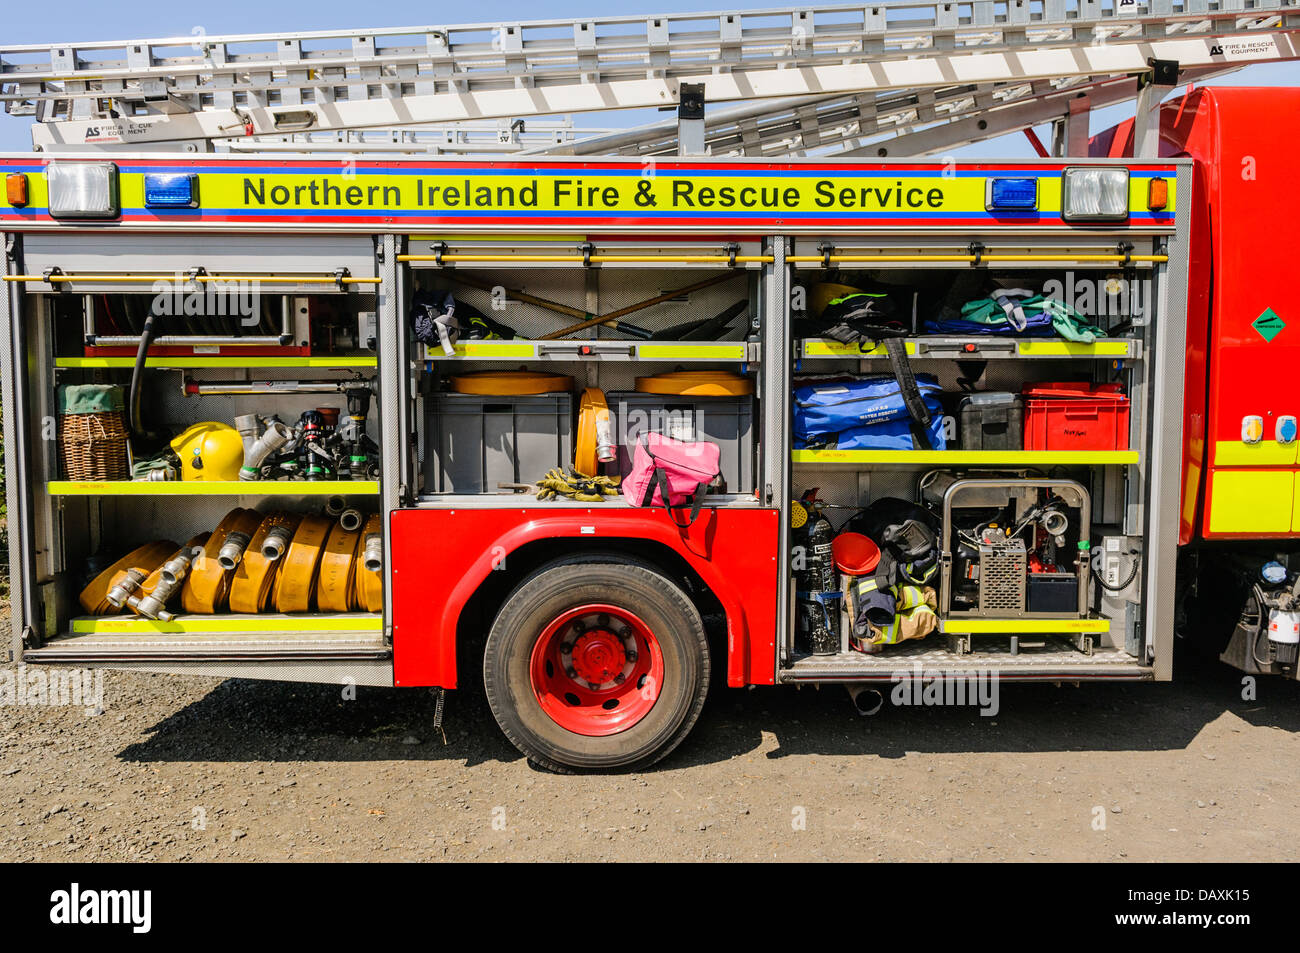 Equipment on a Northern Ireland Fire and Rescue Service vehicle. Stock Photo